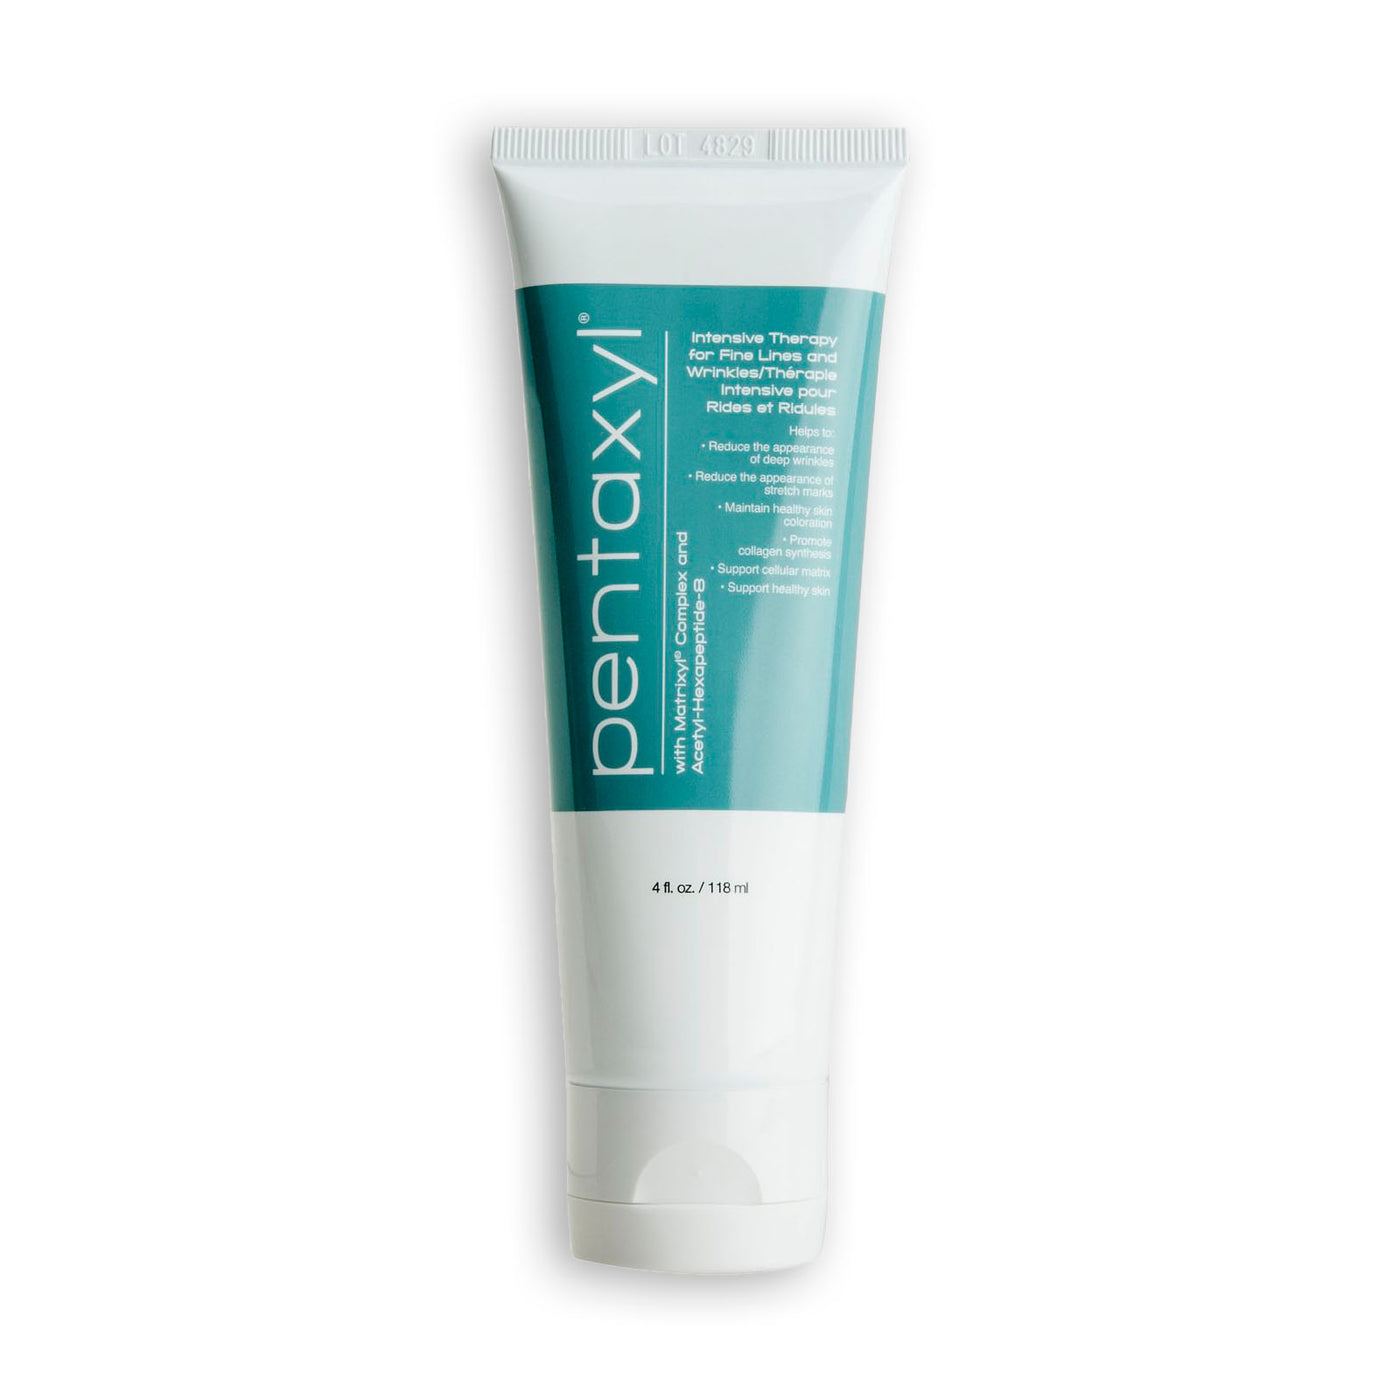 Pentaxyl - Intensive Therapy for Fine Lines & Wrinkles 118ml